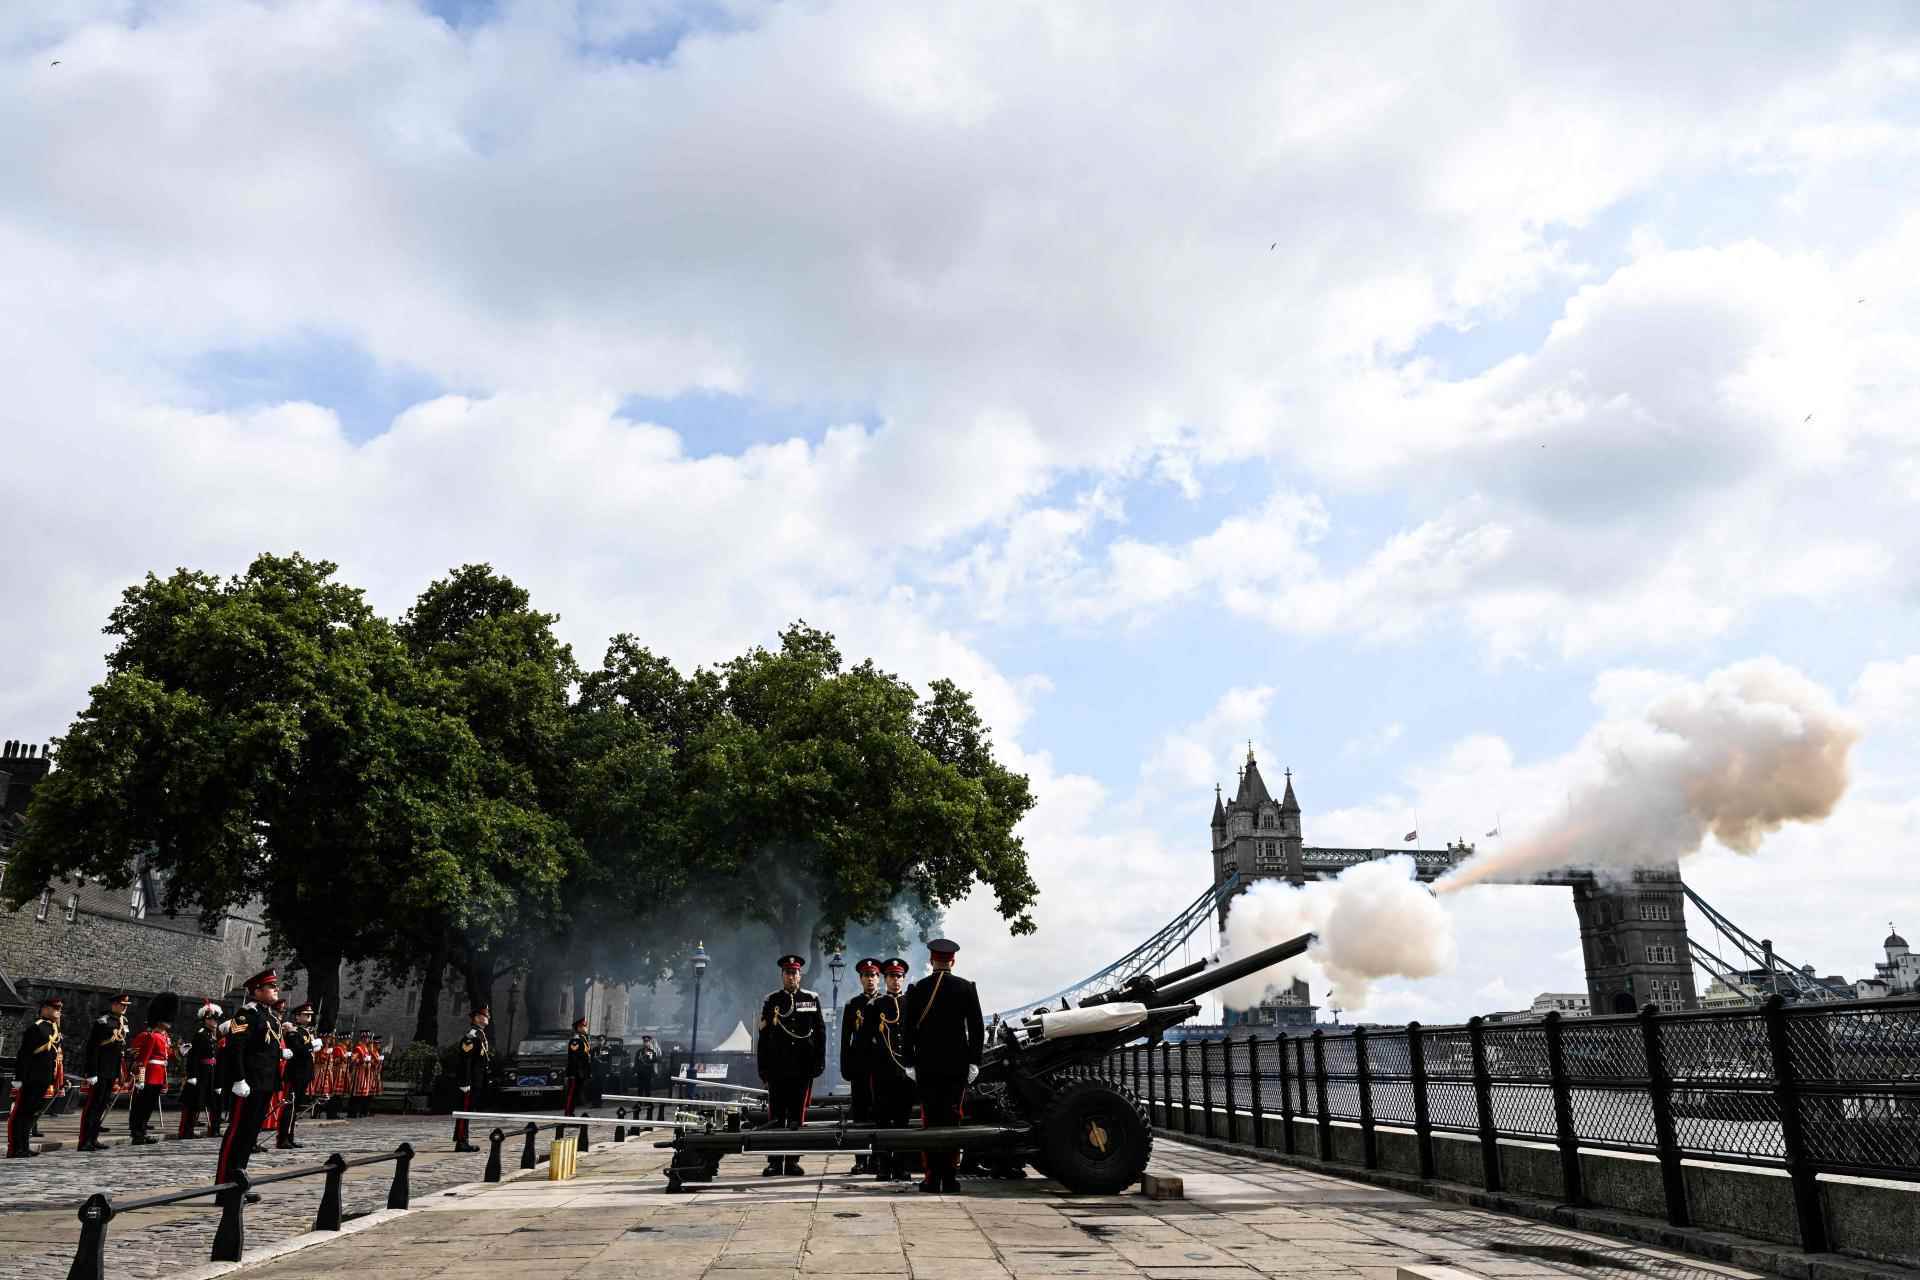 Cannon shots in memory of Queen Elizabeth are fired from the Tower of London by the Honorable Artillery Company, in London on September 9, 2022.